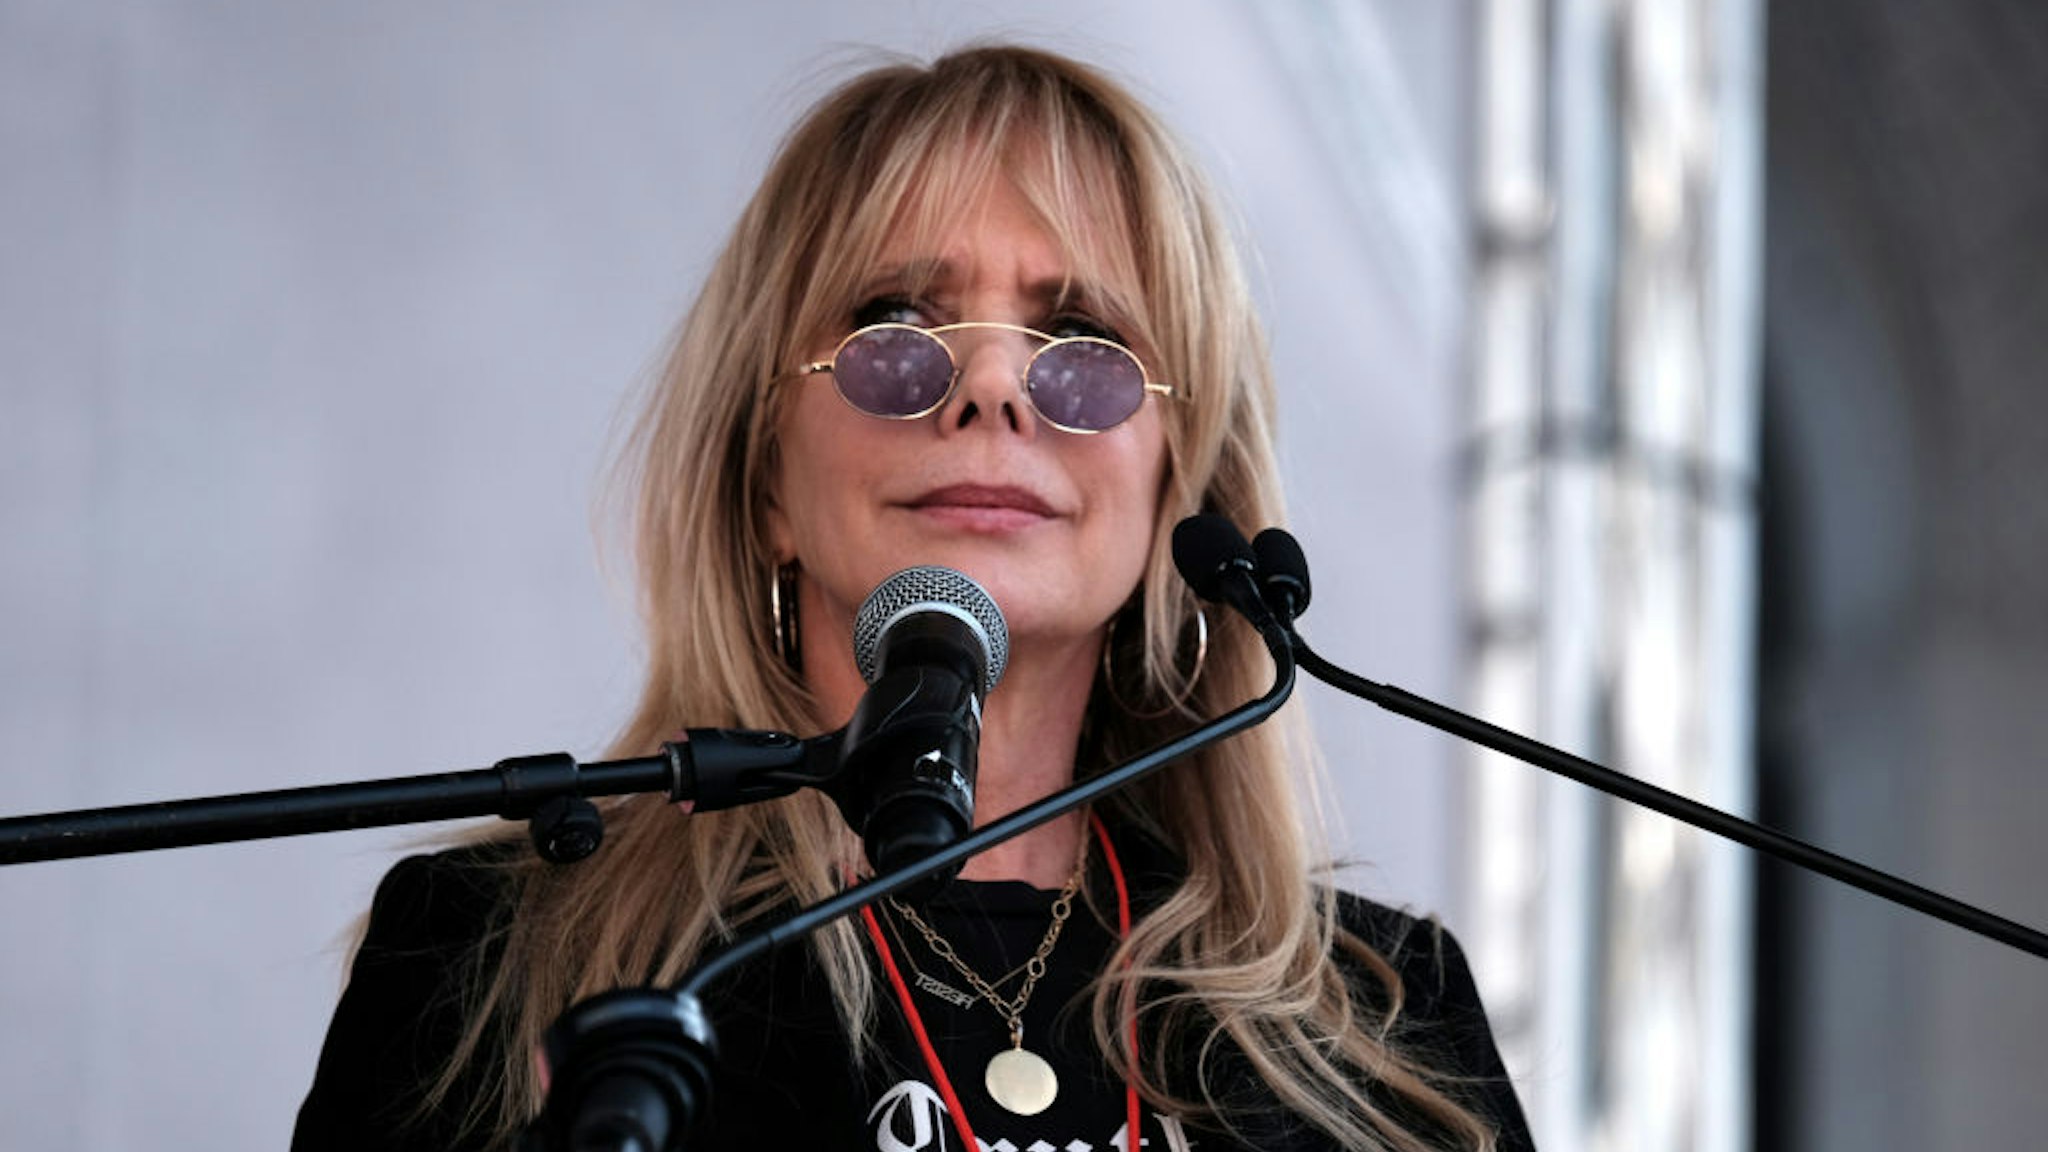 Actress Rosanna Arquette speaks at the 4th Annual Women's March LA: Women Rising at Pershing Square on January 18, 2020 in Los Angeles, California.